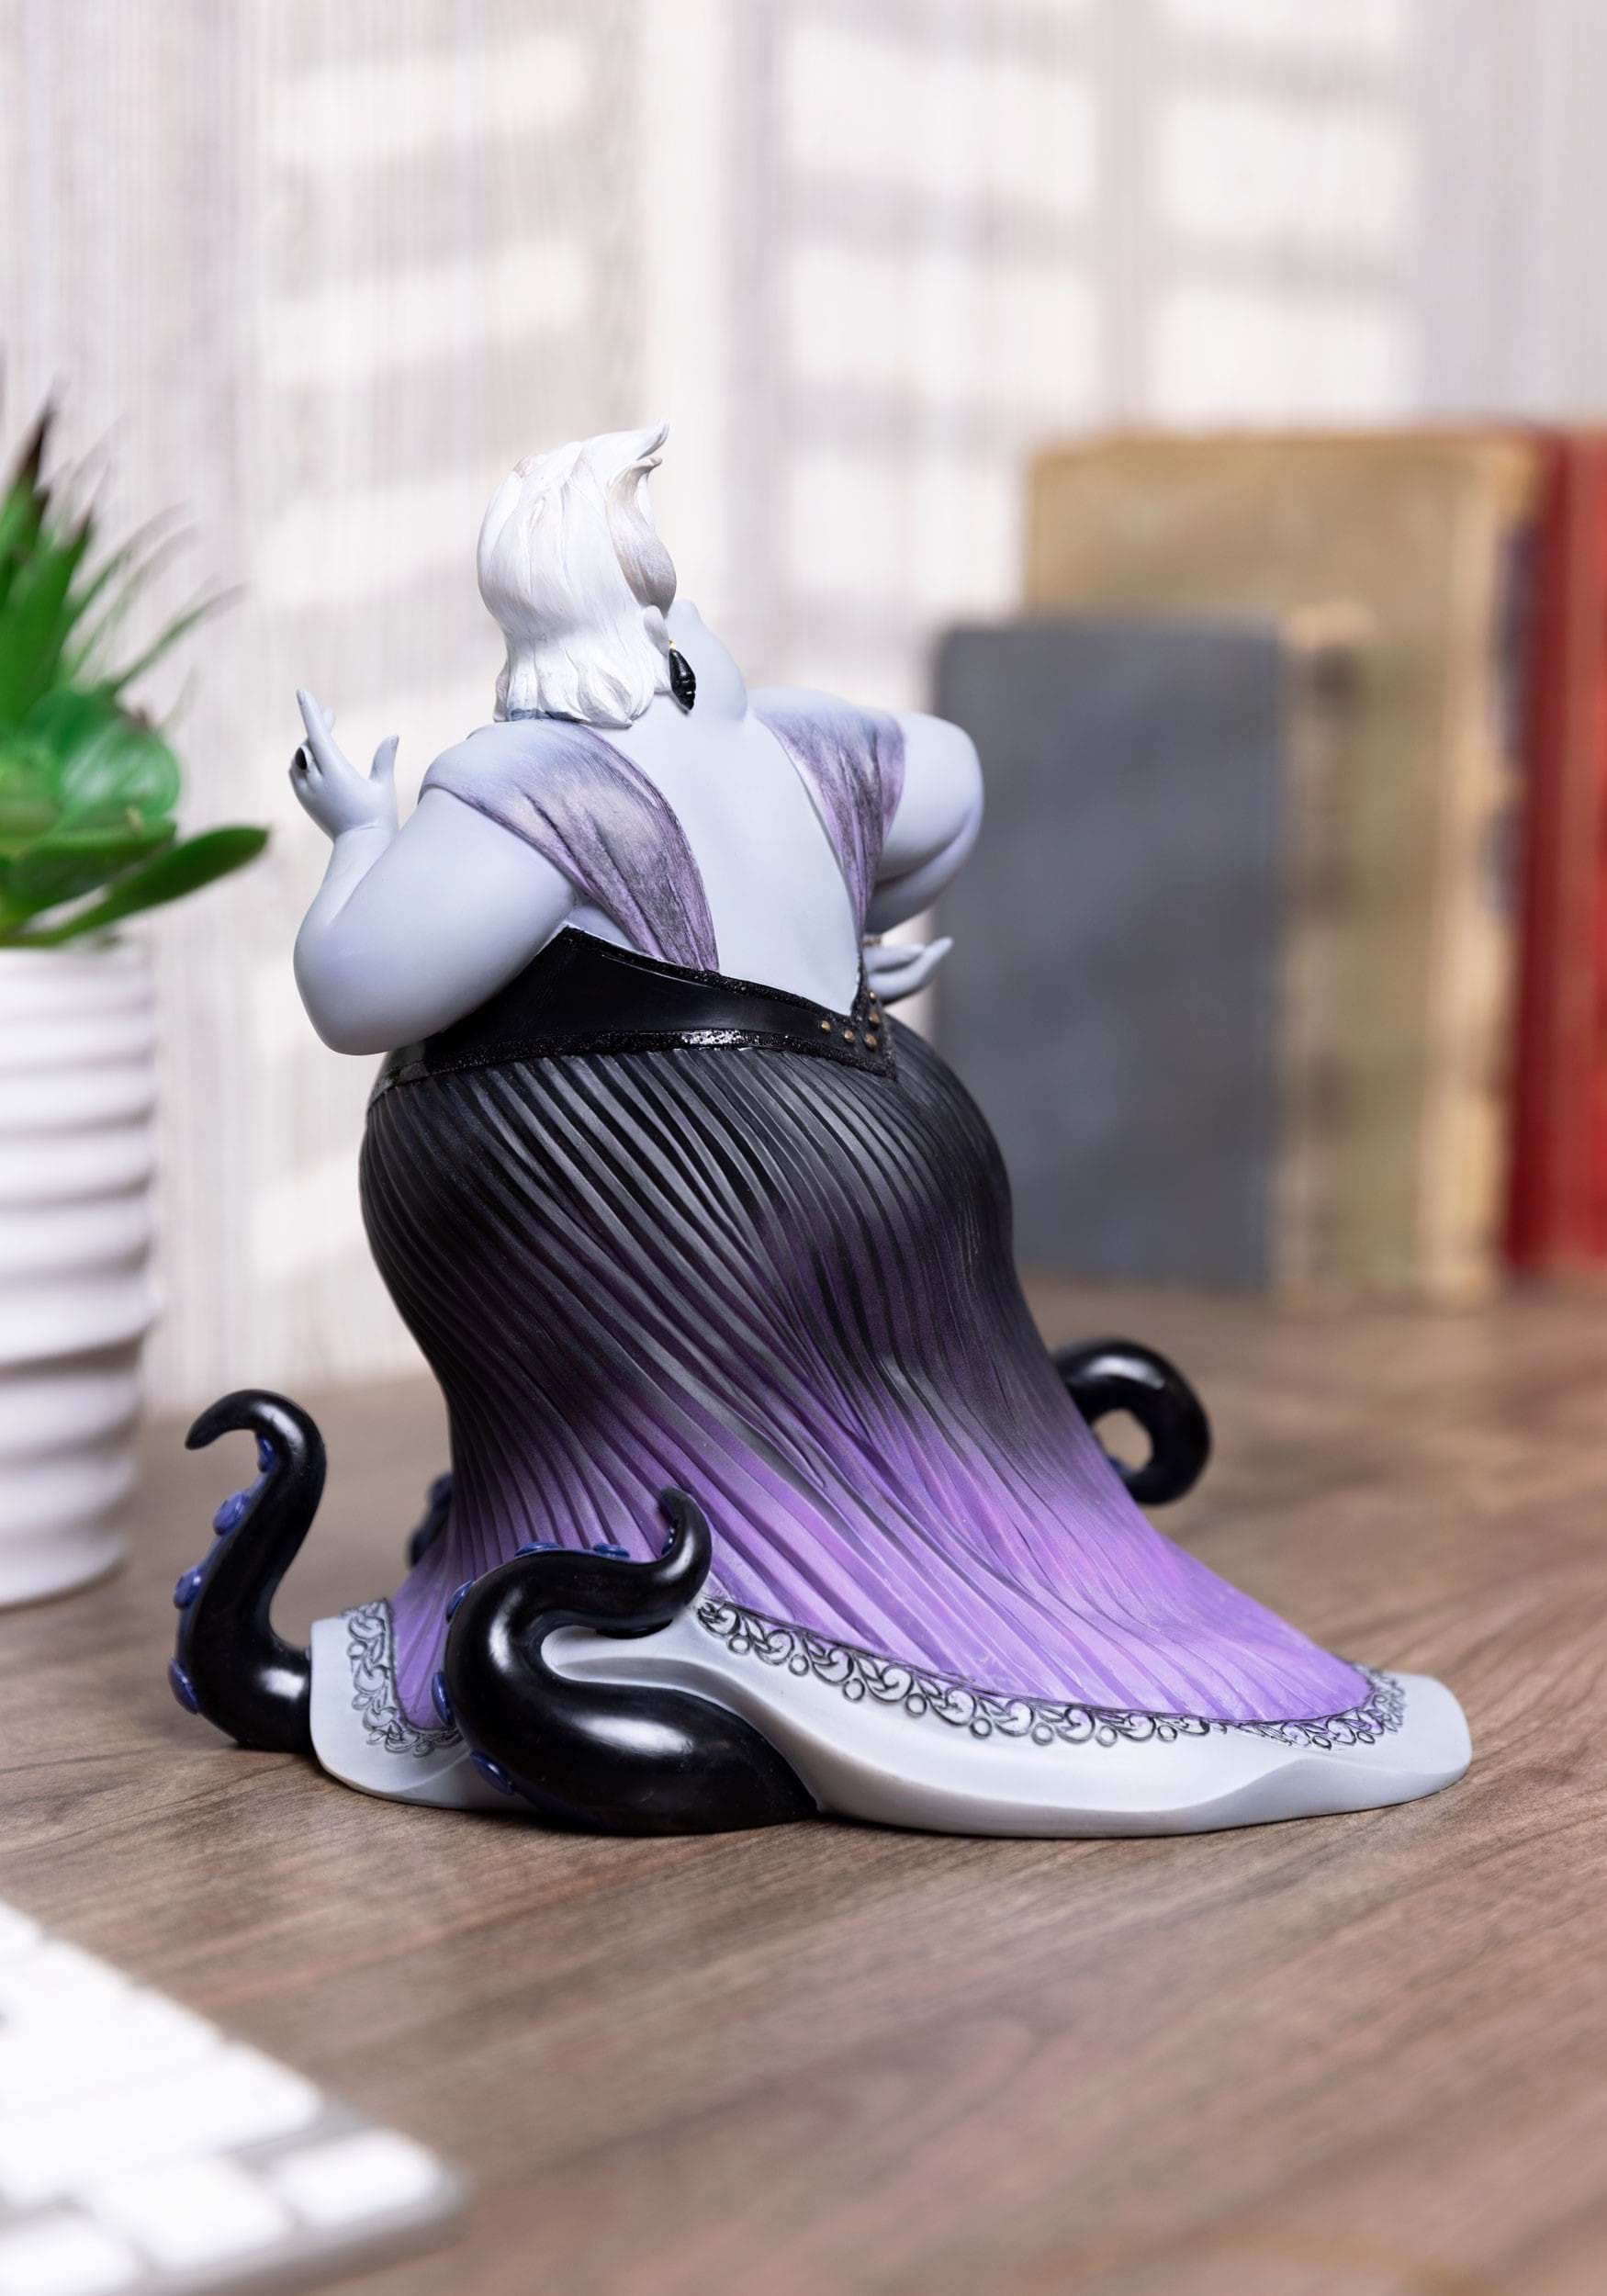 The Little Mermaid Collectible Ursula Statue